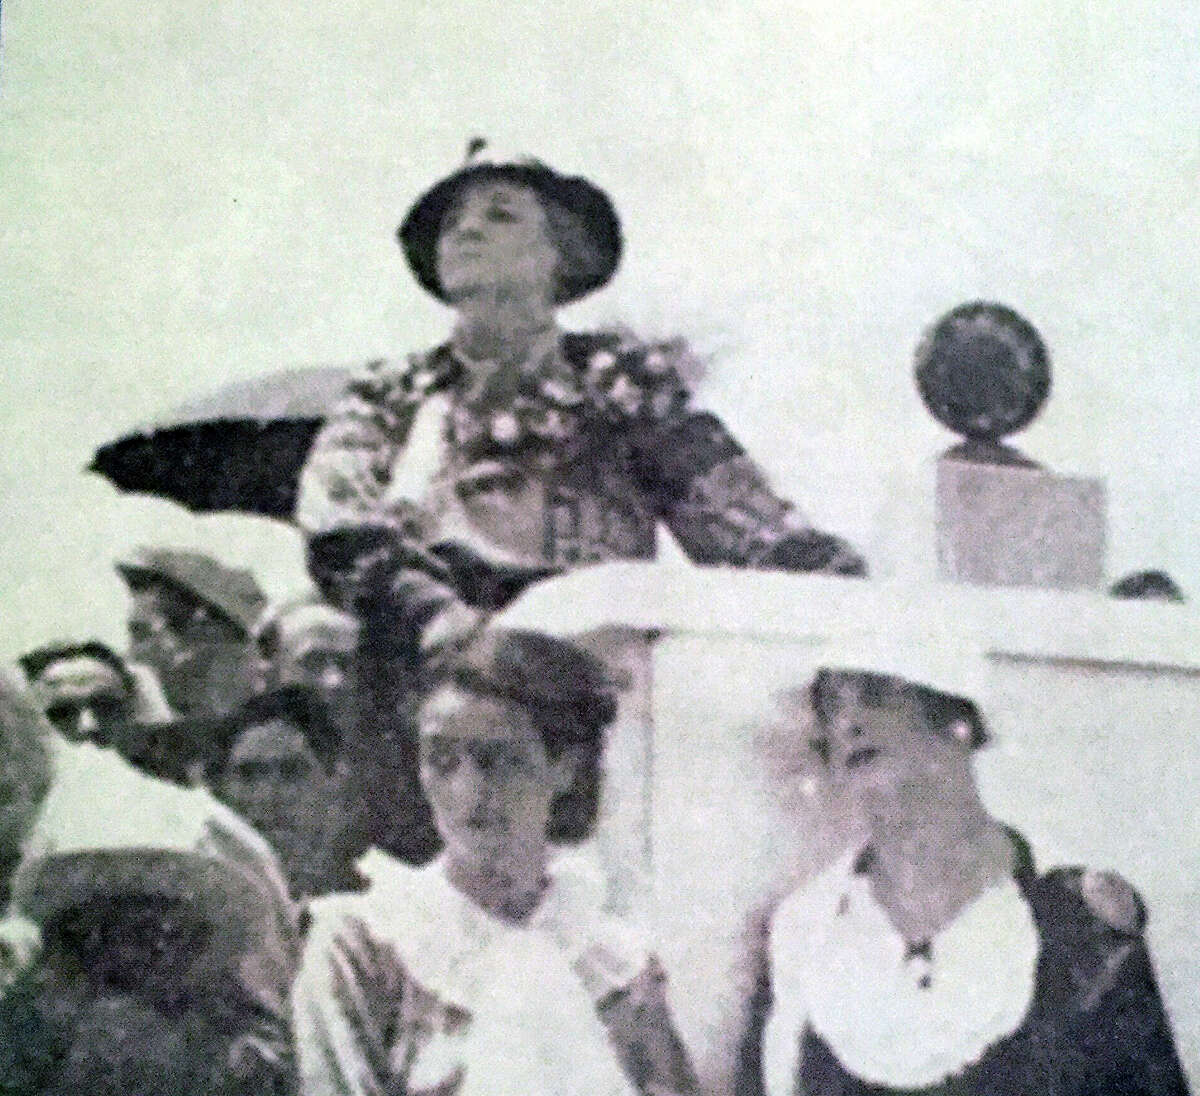 Florence Terry Griswold, founder of the Pan American Round Table, a women’s club that promoted study and understanding of Latin American nations.